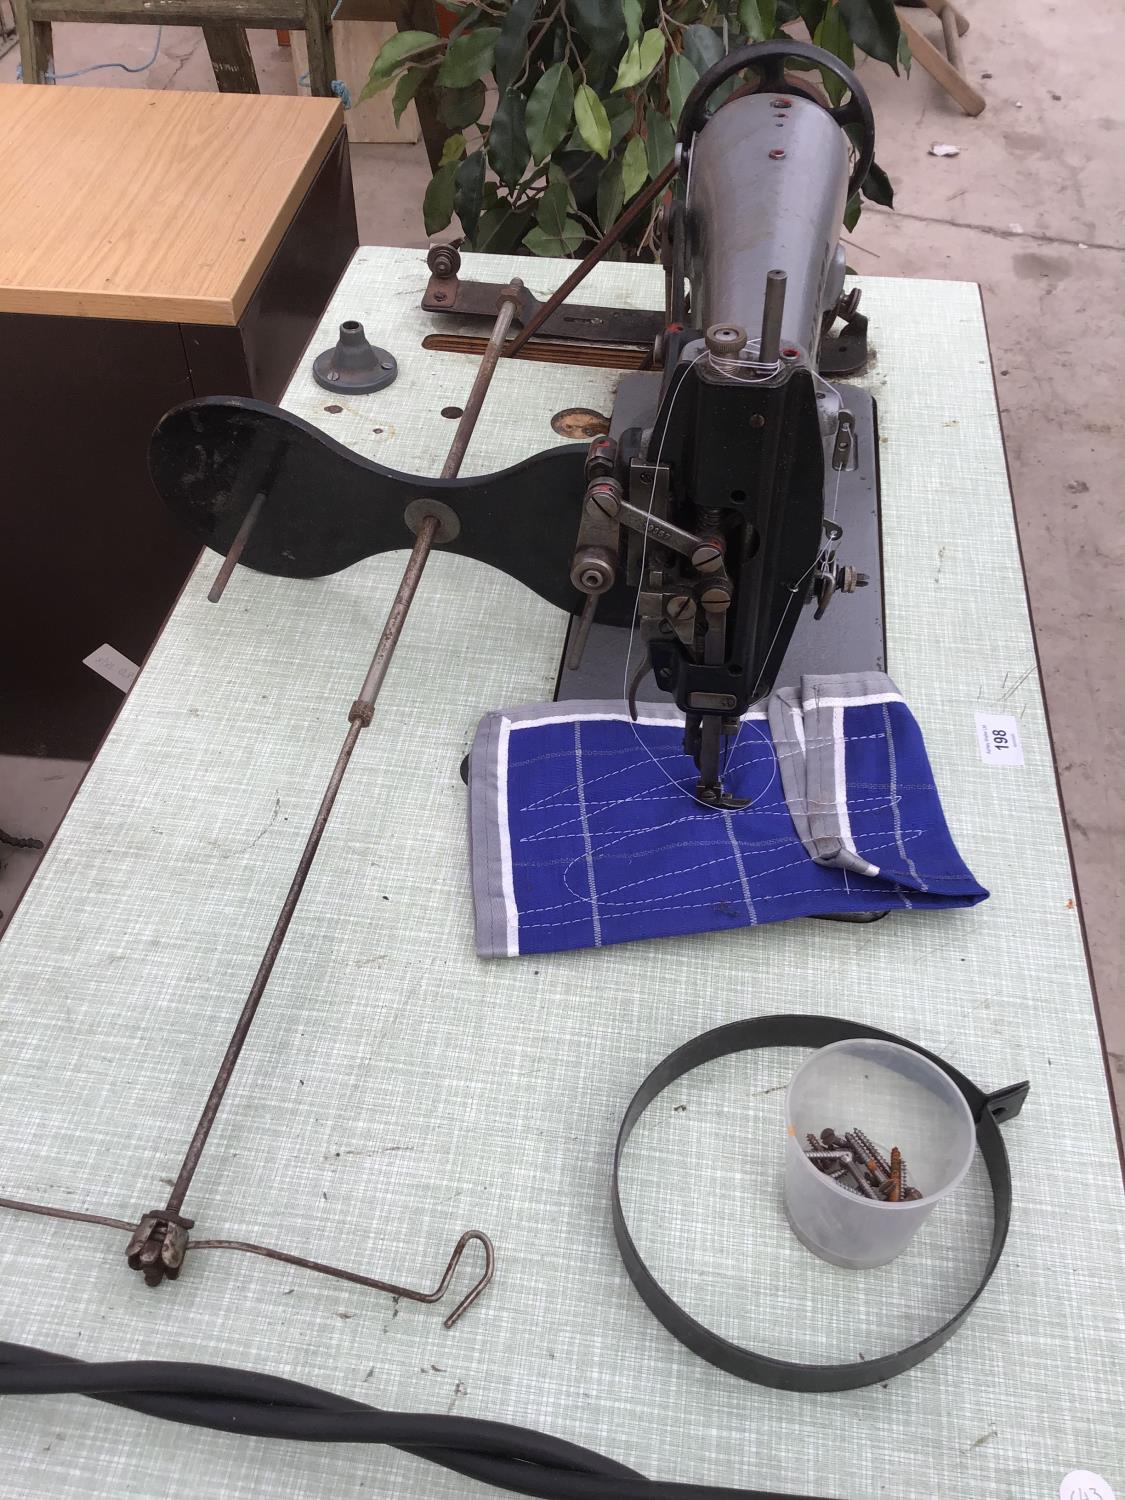 AN INDUSTRIAL SINGER SEWING MACHINE IN WORKING ORDER - Image 3 of 4